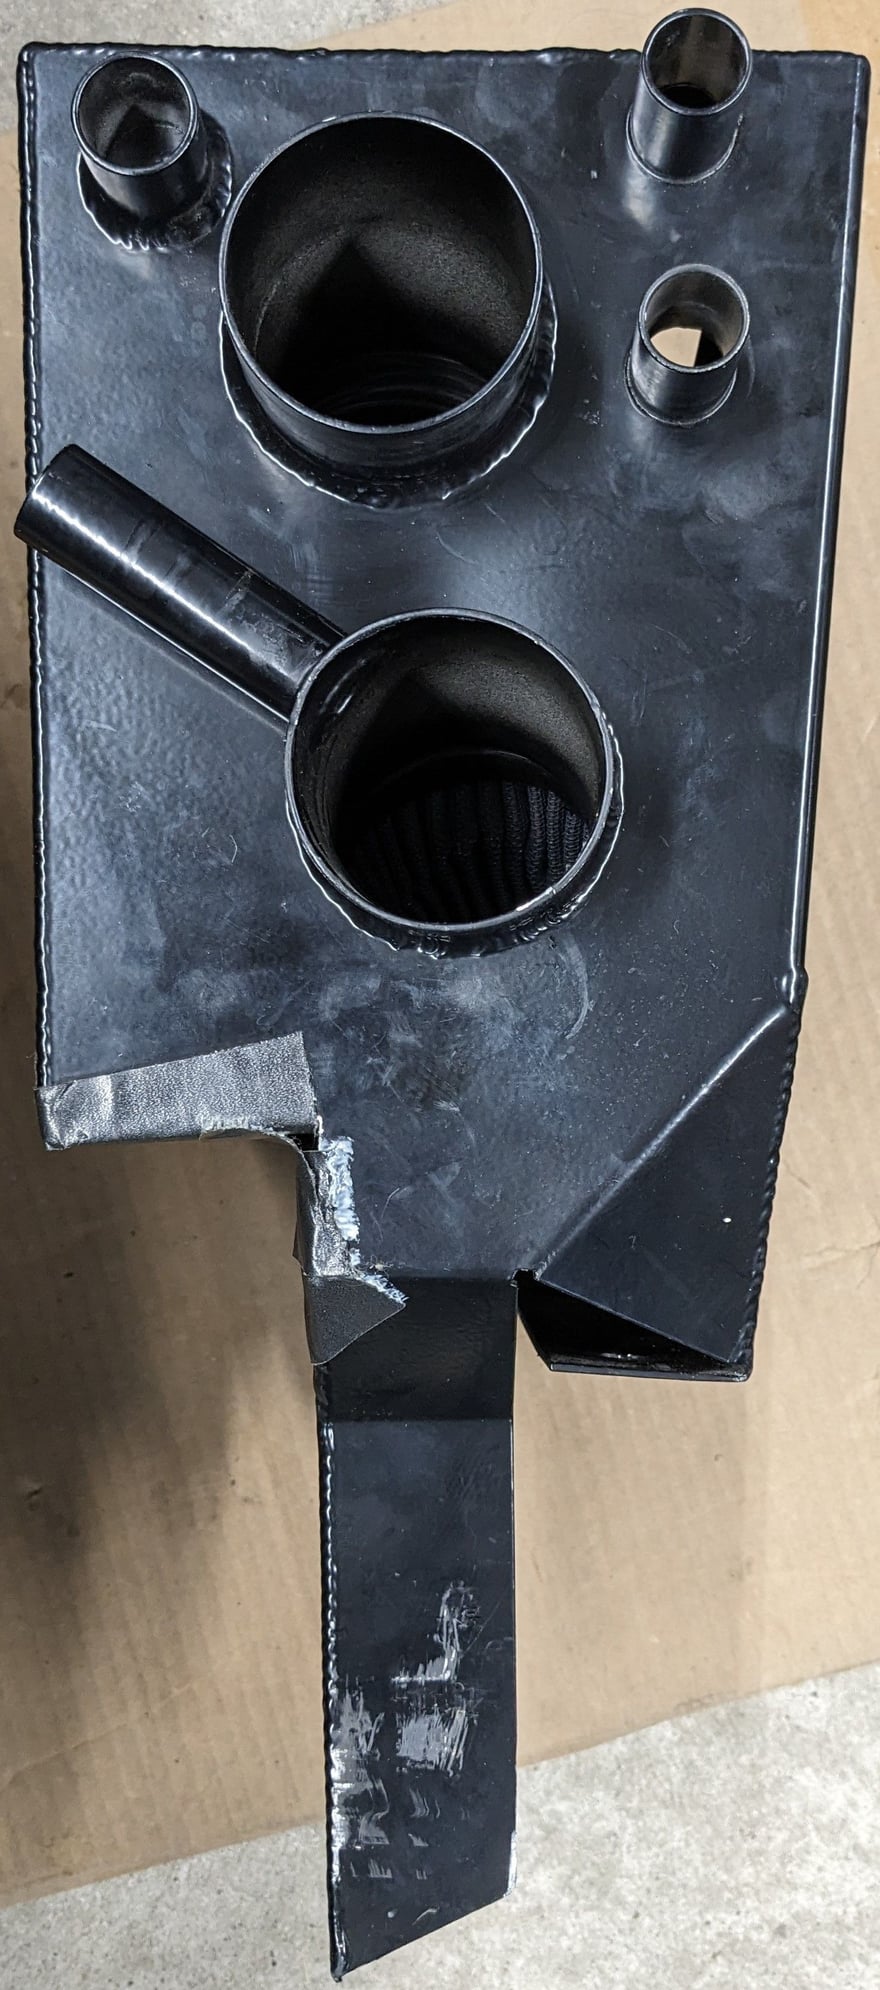 Engine - Intake/Fuel - M2 style aluminum intake box - Used - 1993 to 1995 Mazda RX-7 - Roselle, IL 60172, United States